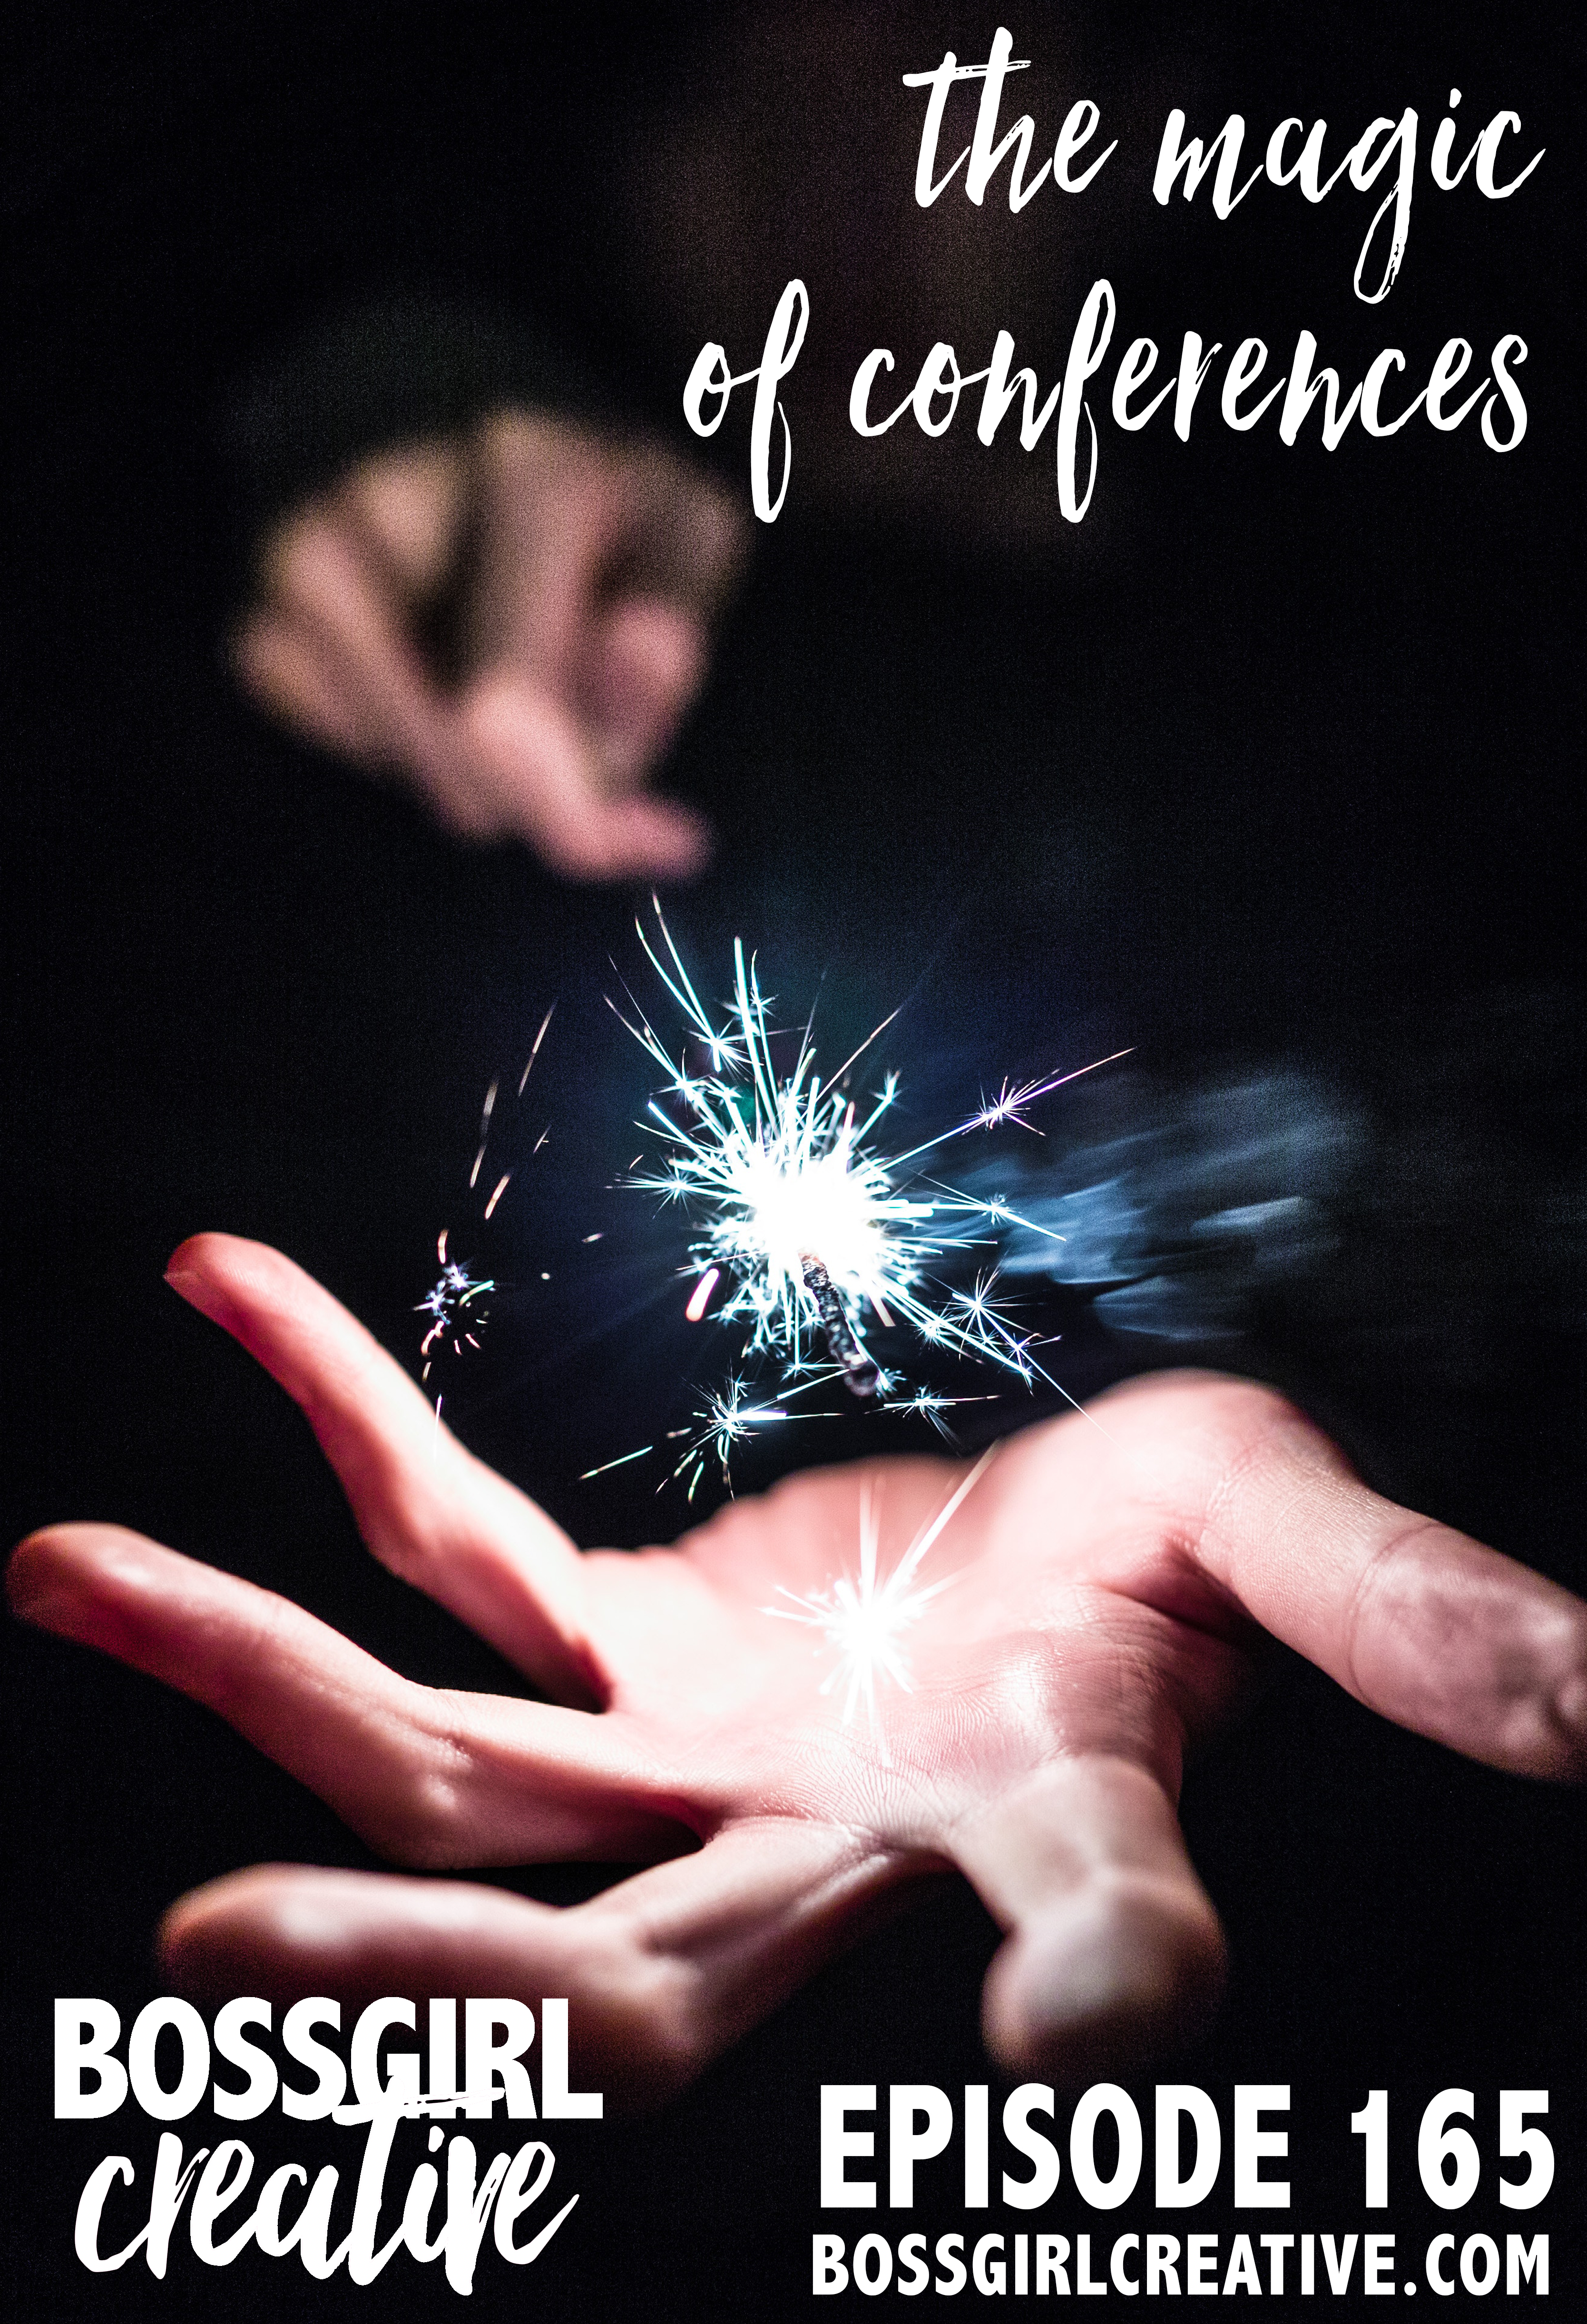 On the fence about whether you should attend a conference? Episode 165 is all about the Magic of Conferences. Find out what makes conferences so special!